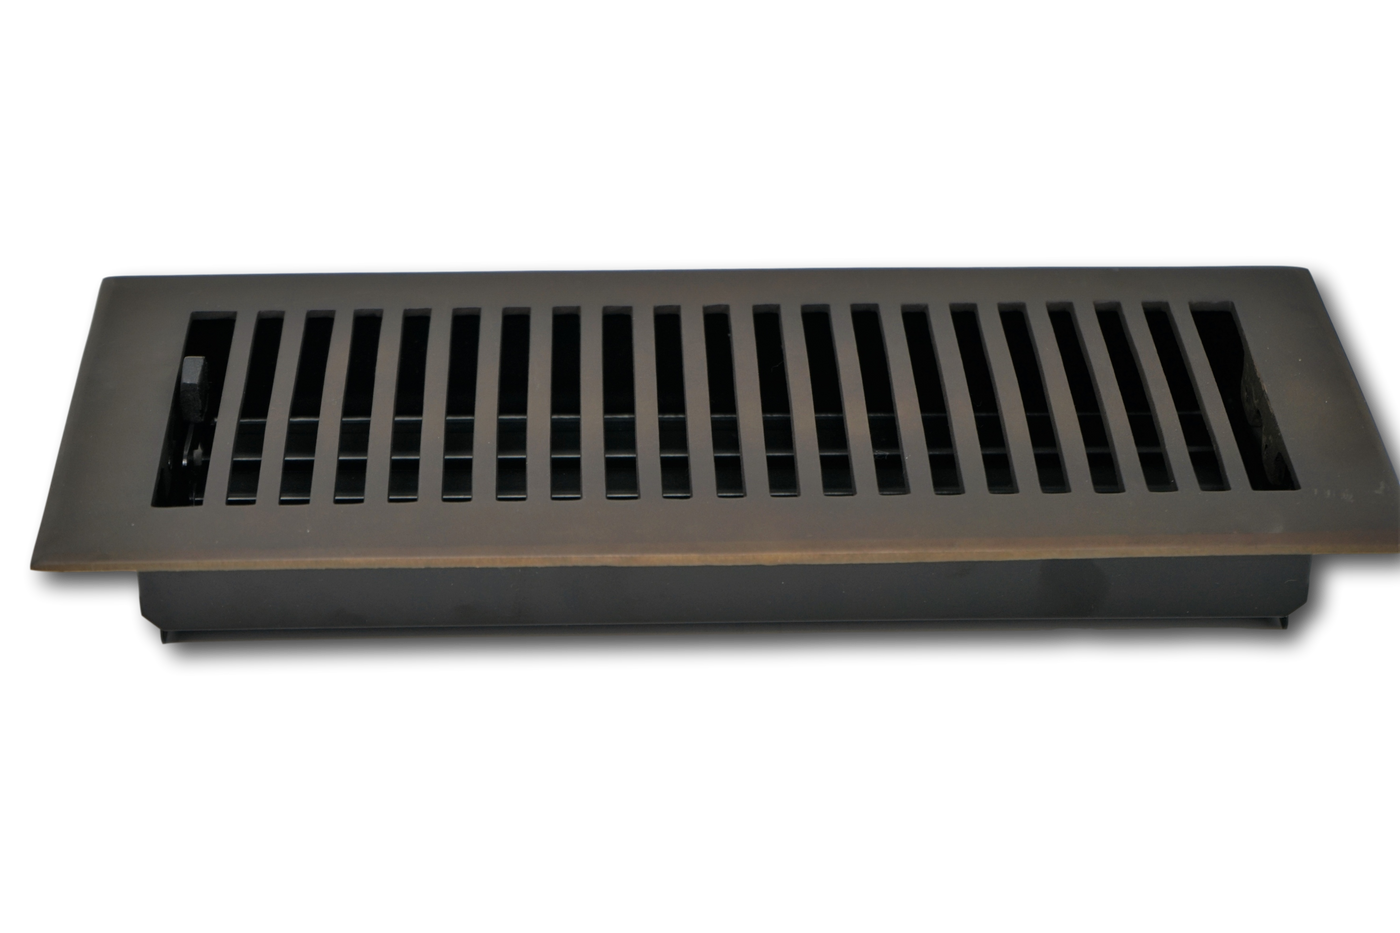 Cast Brass Contemporary Vent Covers - Oil Rubbed Bronze - 4" x 12" (Overall: 5-1/4" x 13-1/2")